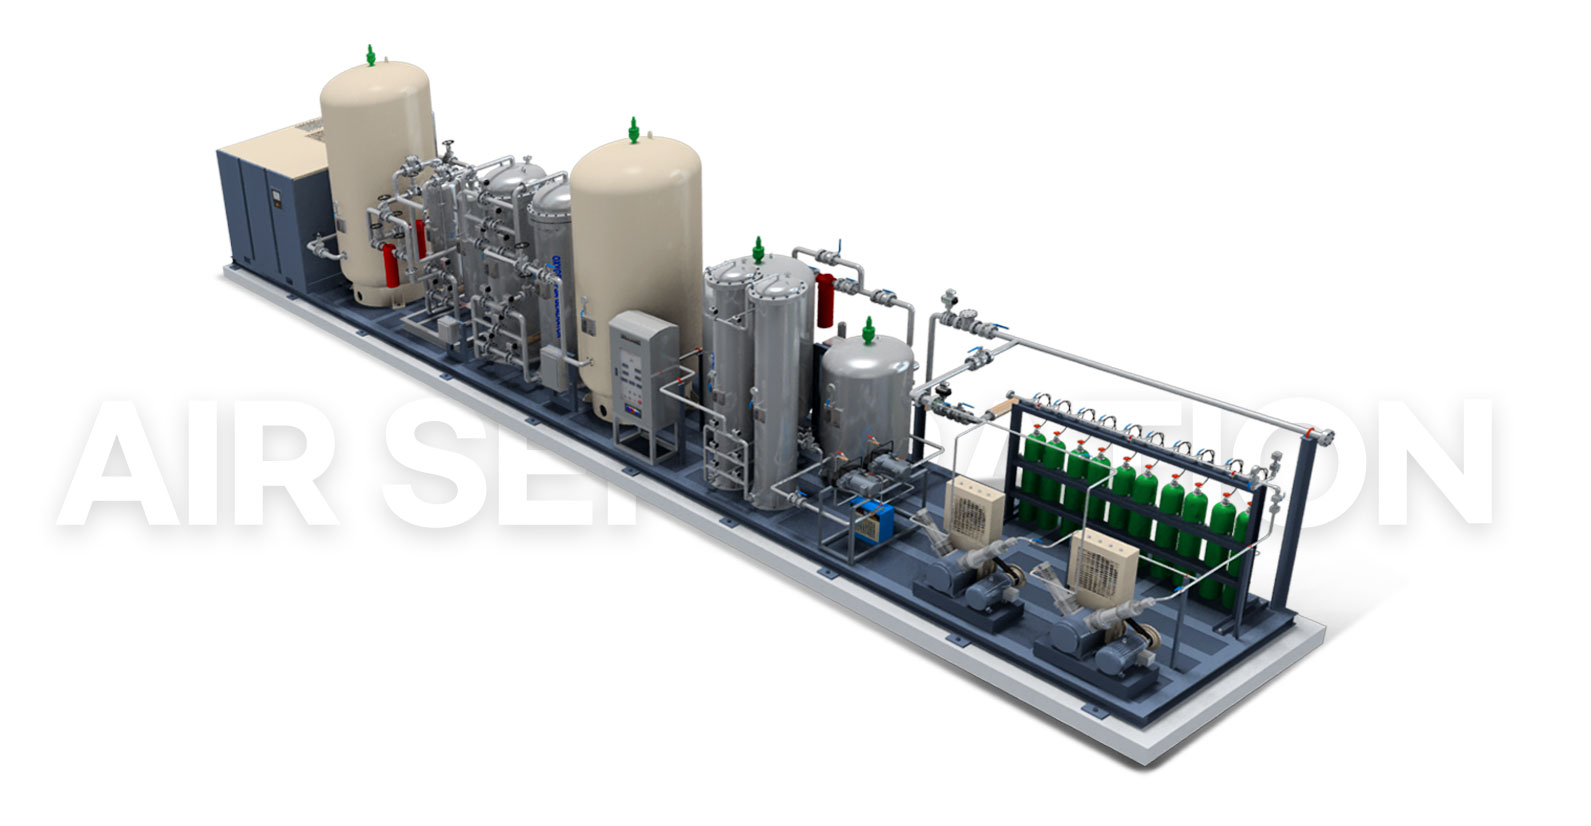 Aspe offers effective O2 purifier Package solutions through its expertise in hydrogen plant process and Deoxygenation.